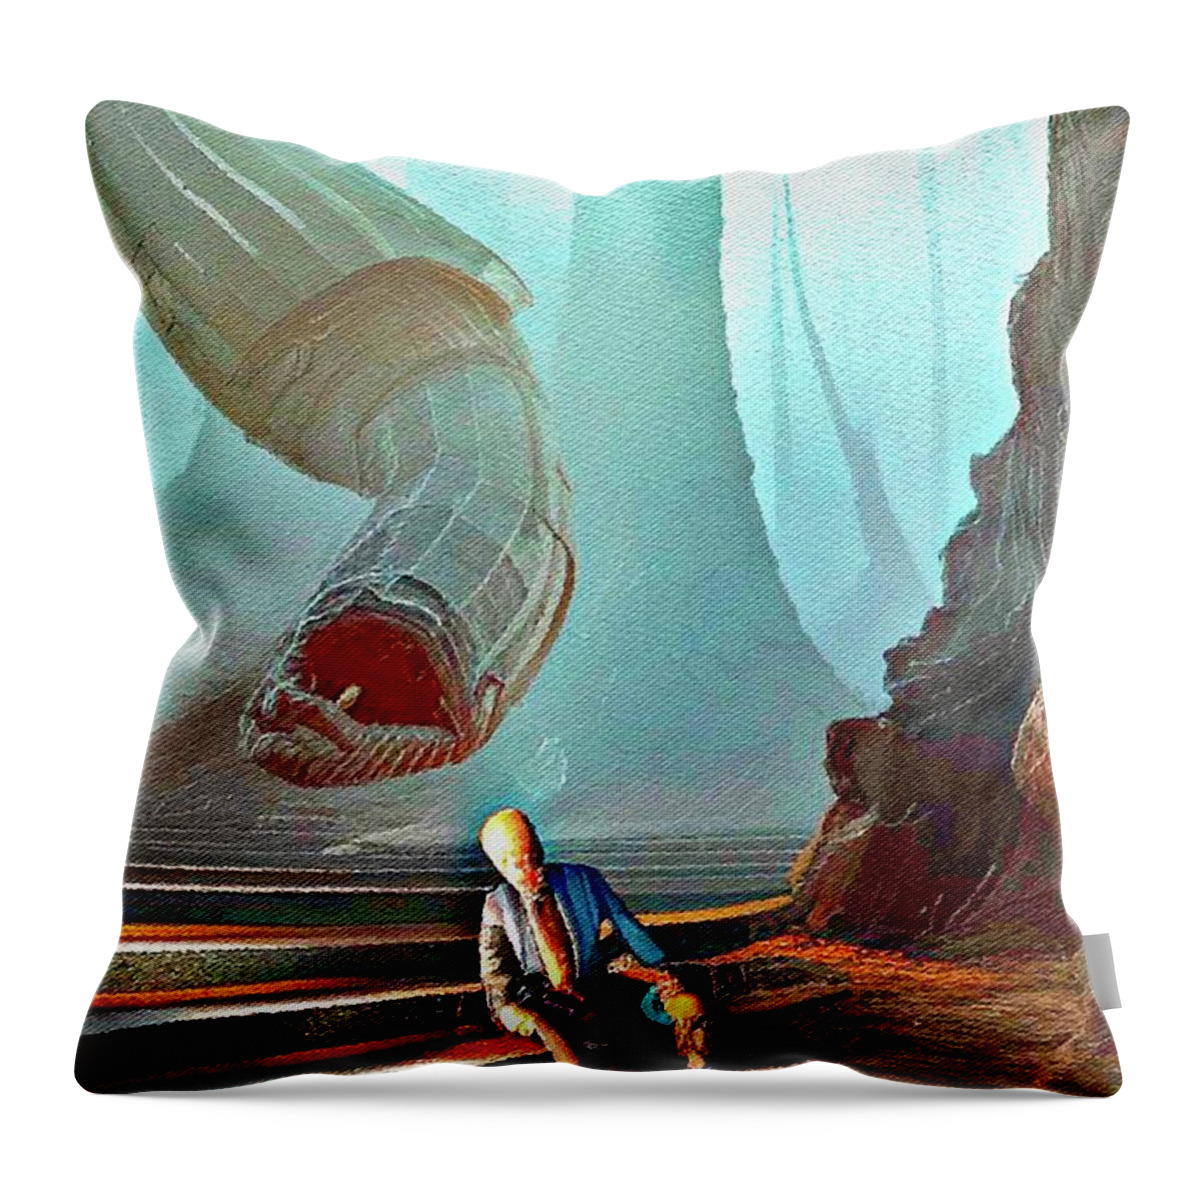 Parasite Throw Pillow featuring the digital art Electronic Parasite by Laurie's Intuitive